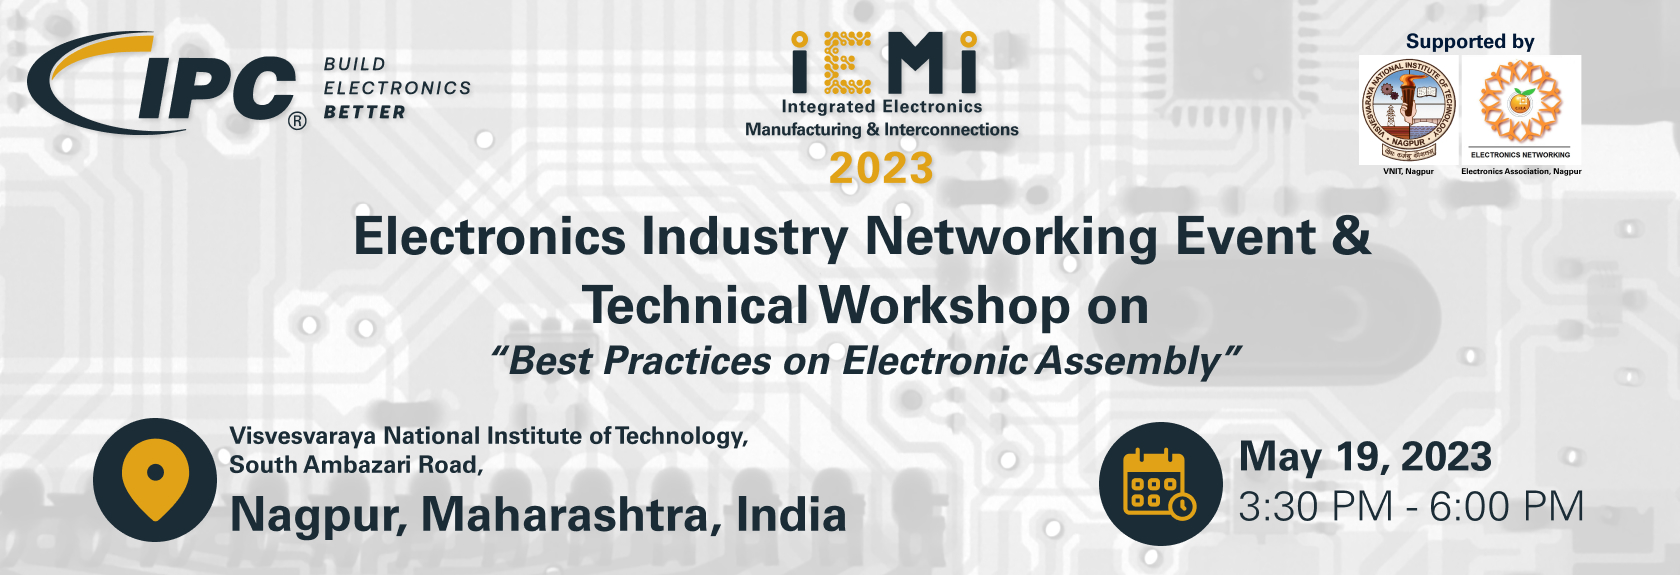 https://www.ipc.org/ipc-industry-networking-event-technical-workshop-nagpur